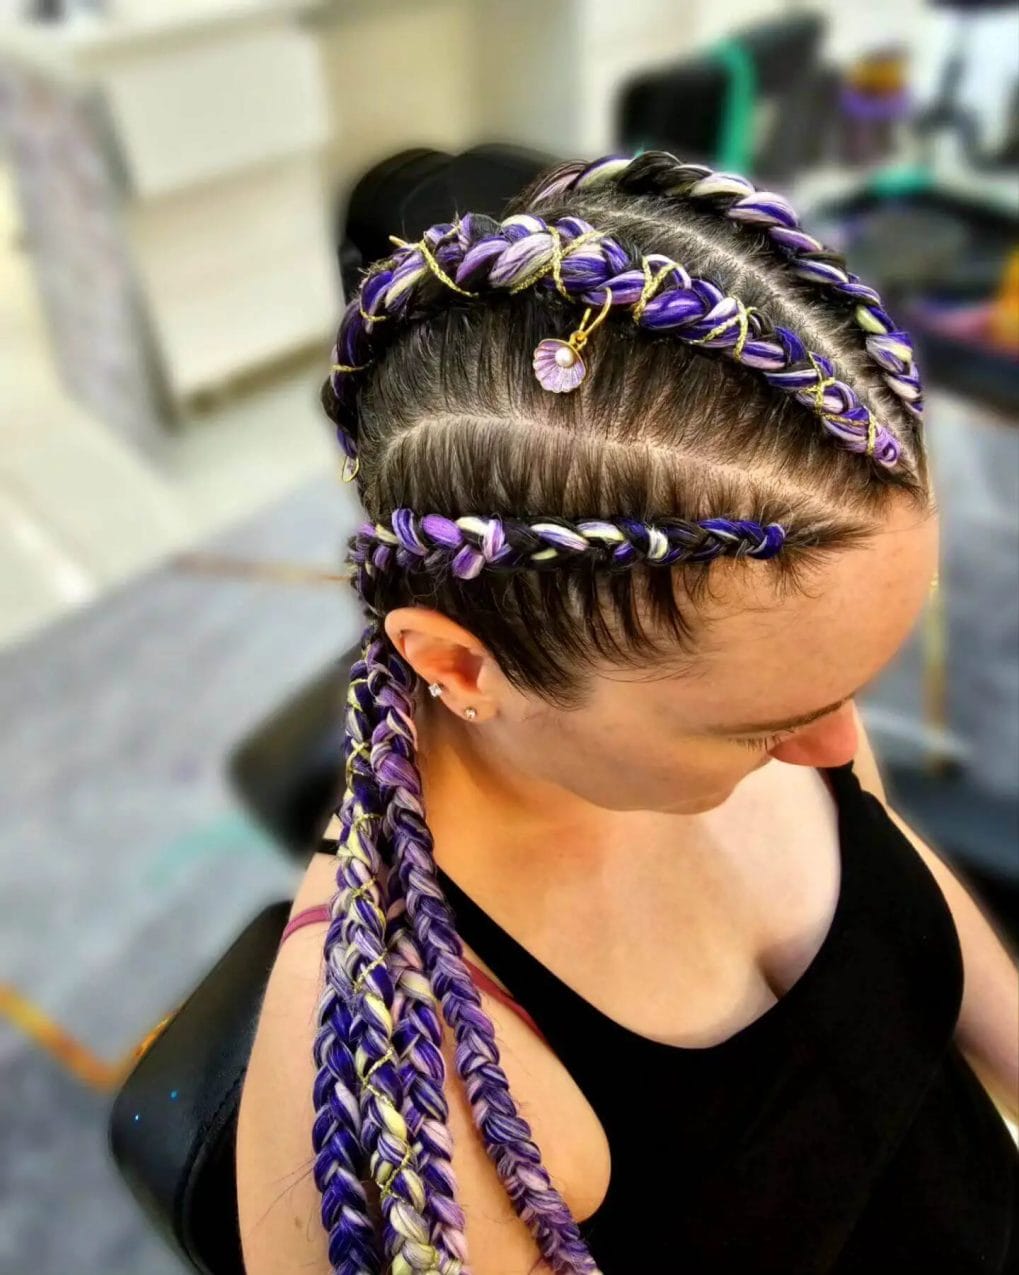 Vibrant Viking braids in purple with golden charms.